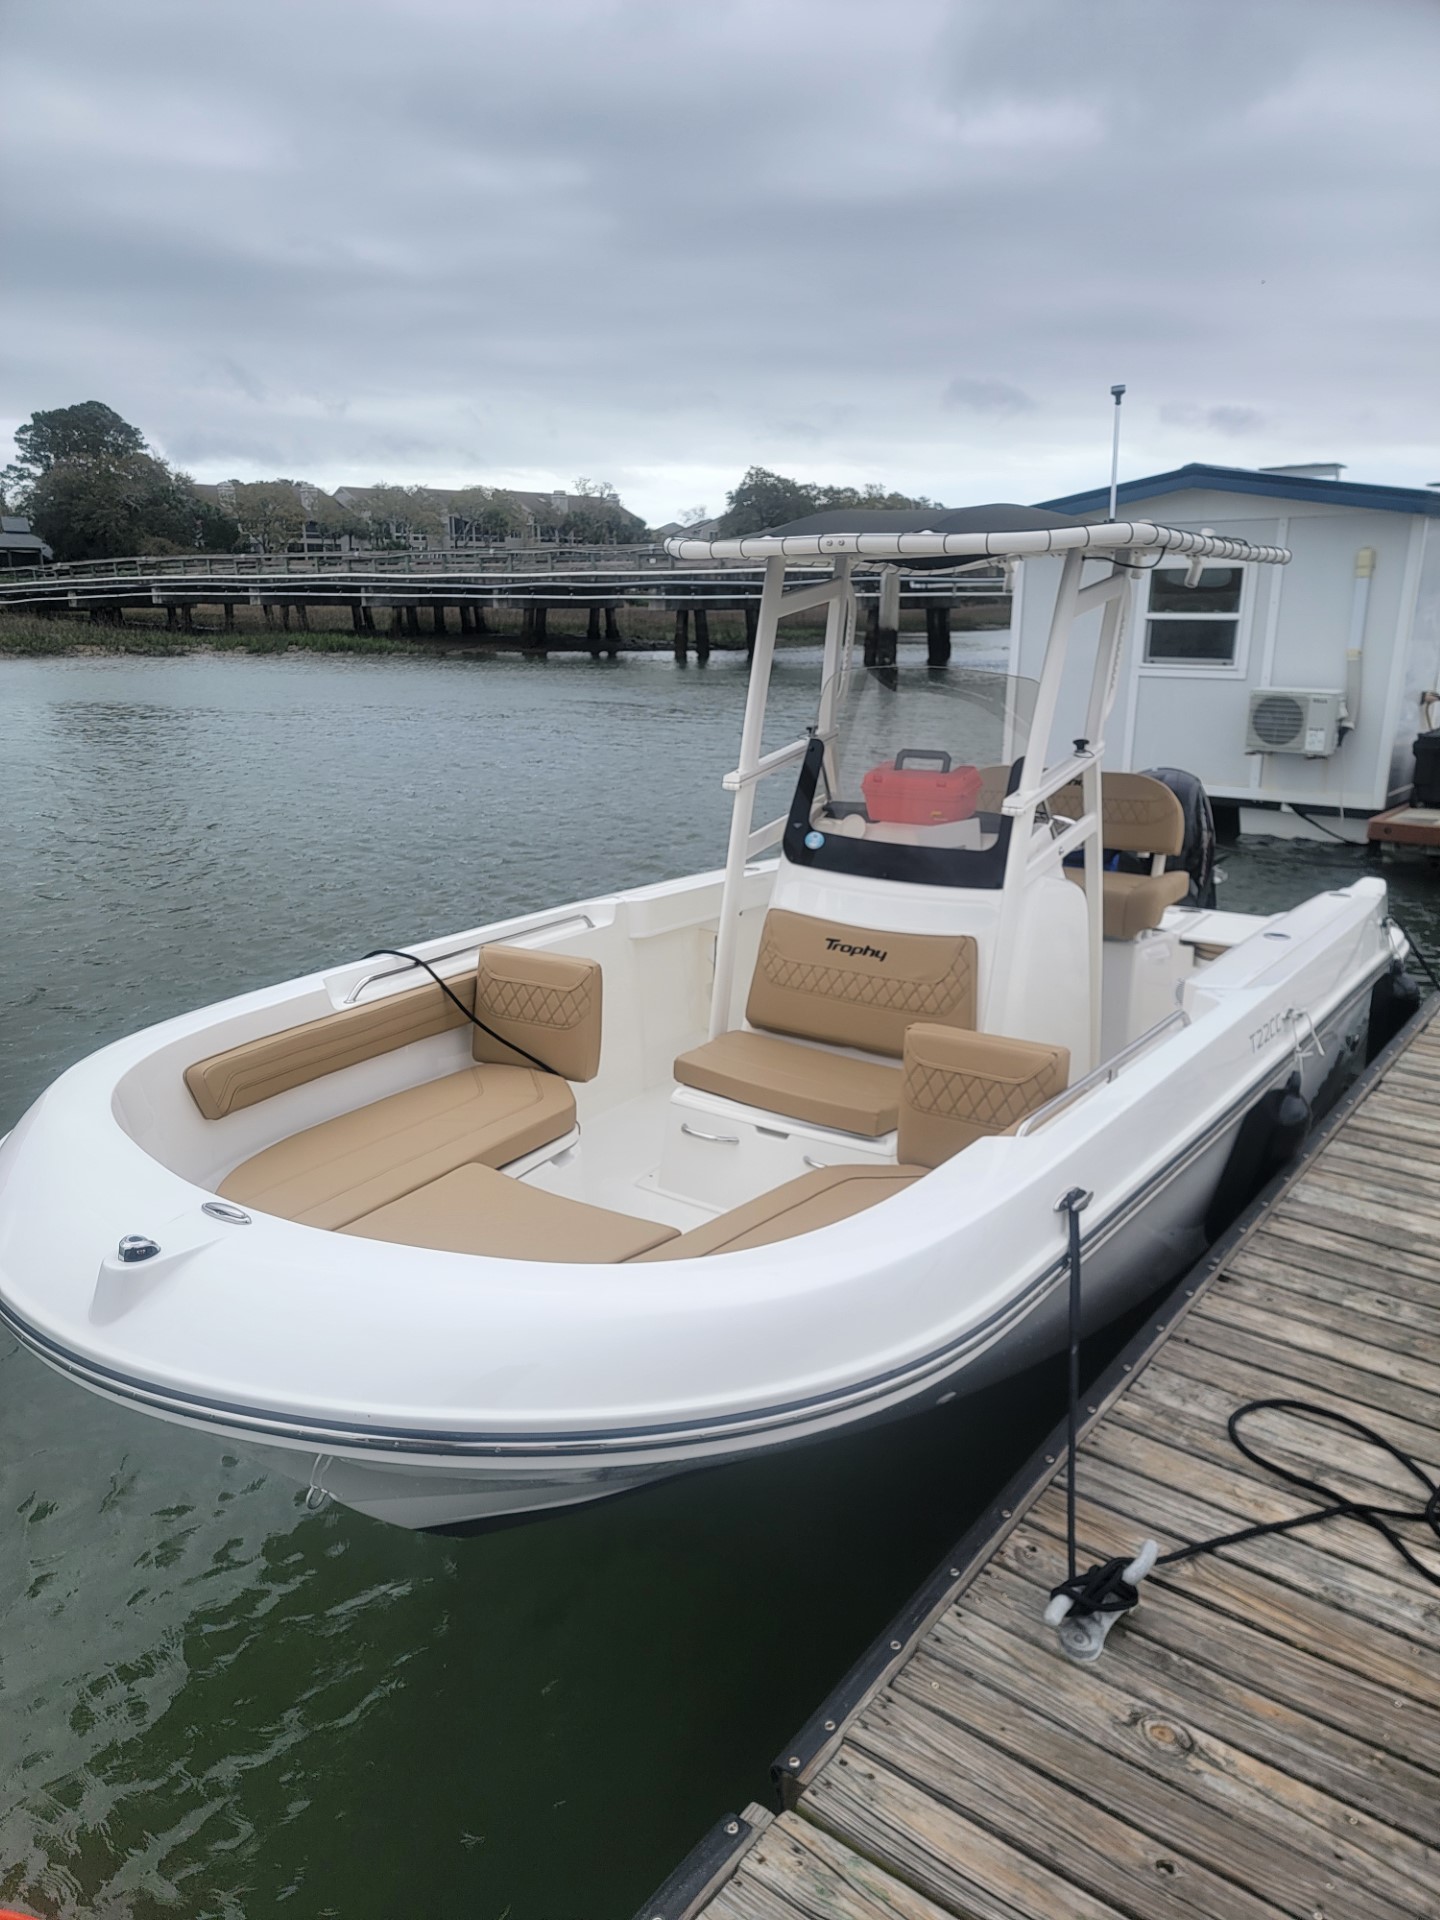 Island Freedom 4 (22FT Bayliner Trophy 22 Center Console - 150 HP~Fishing)